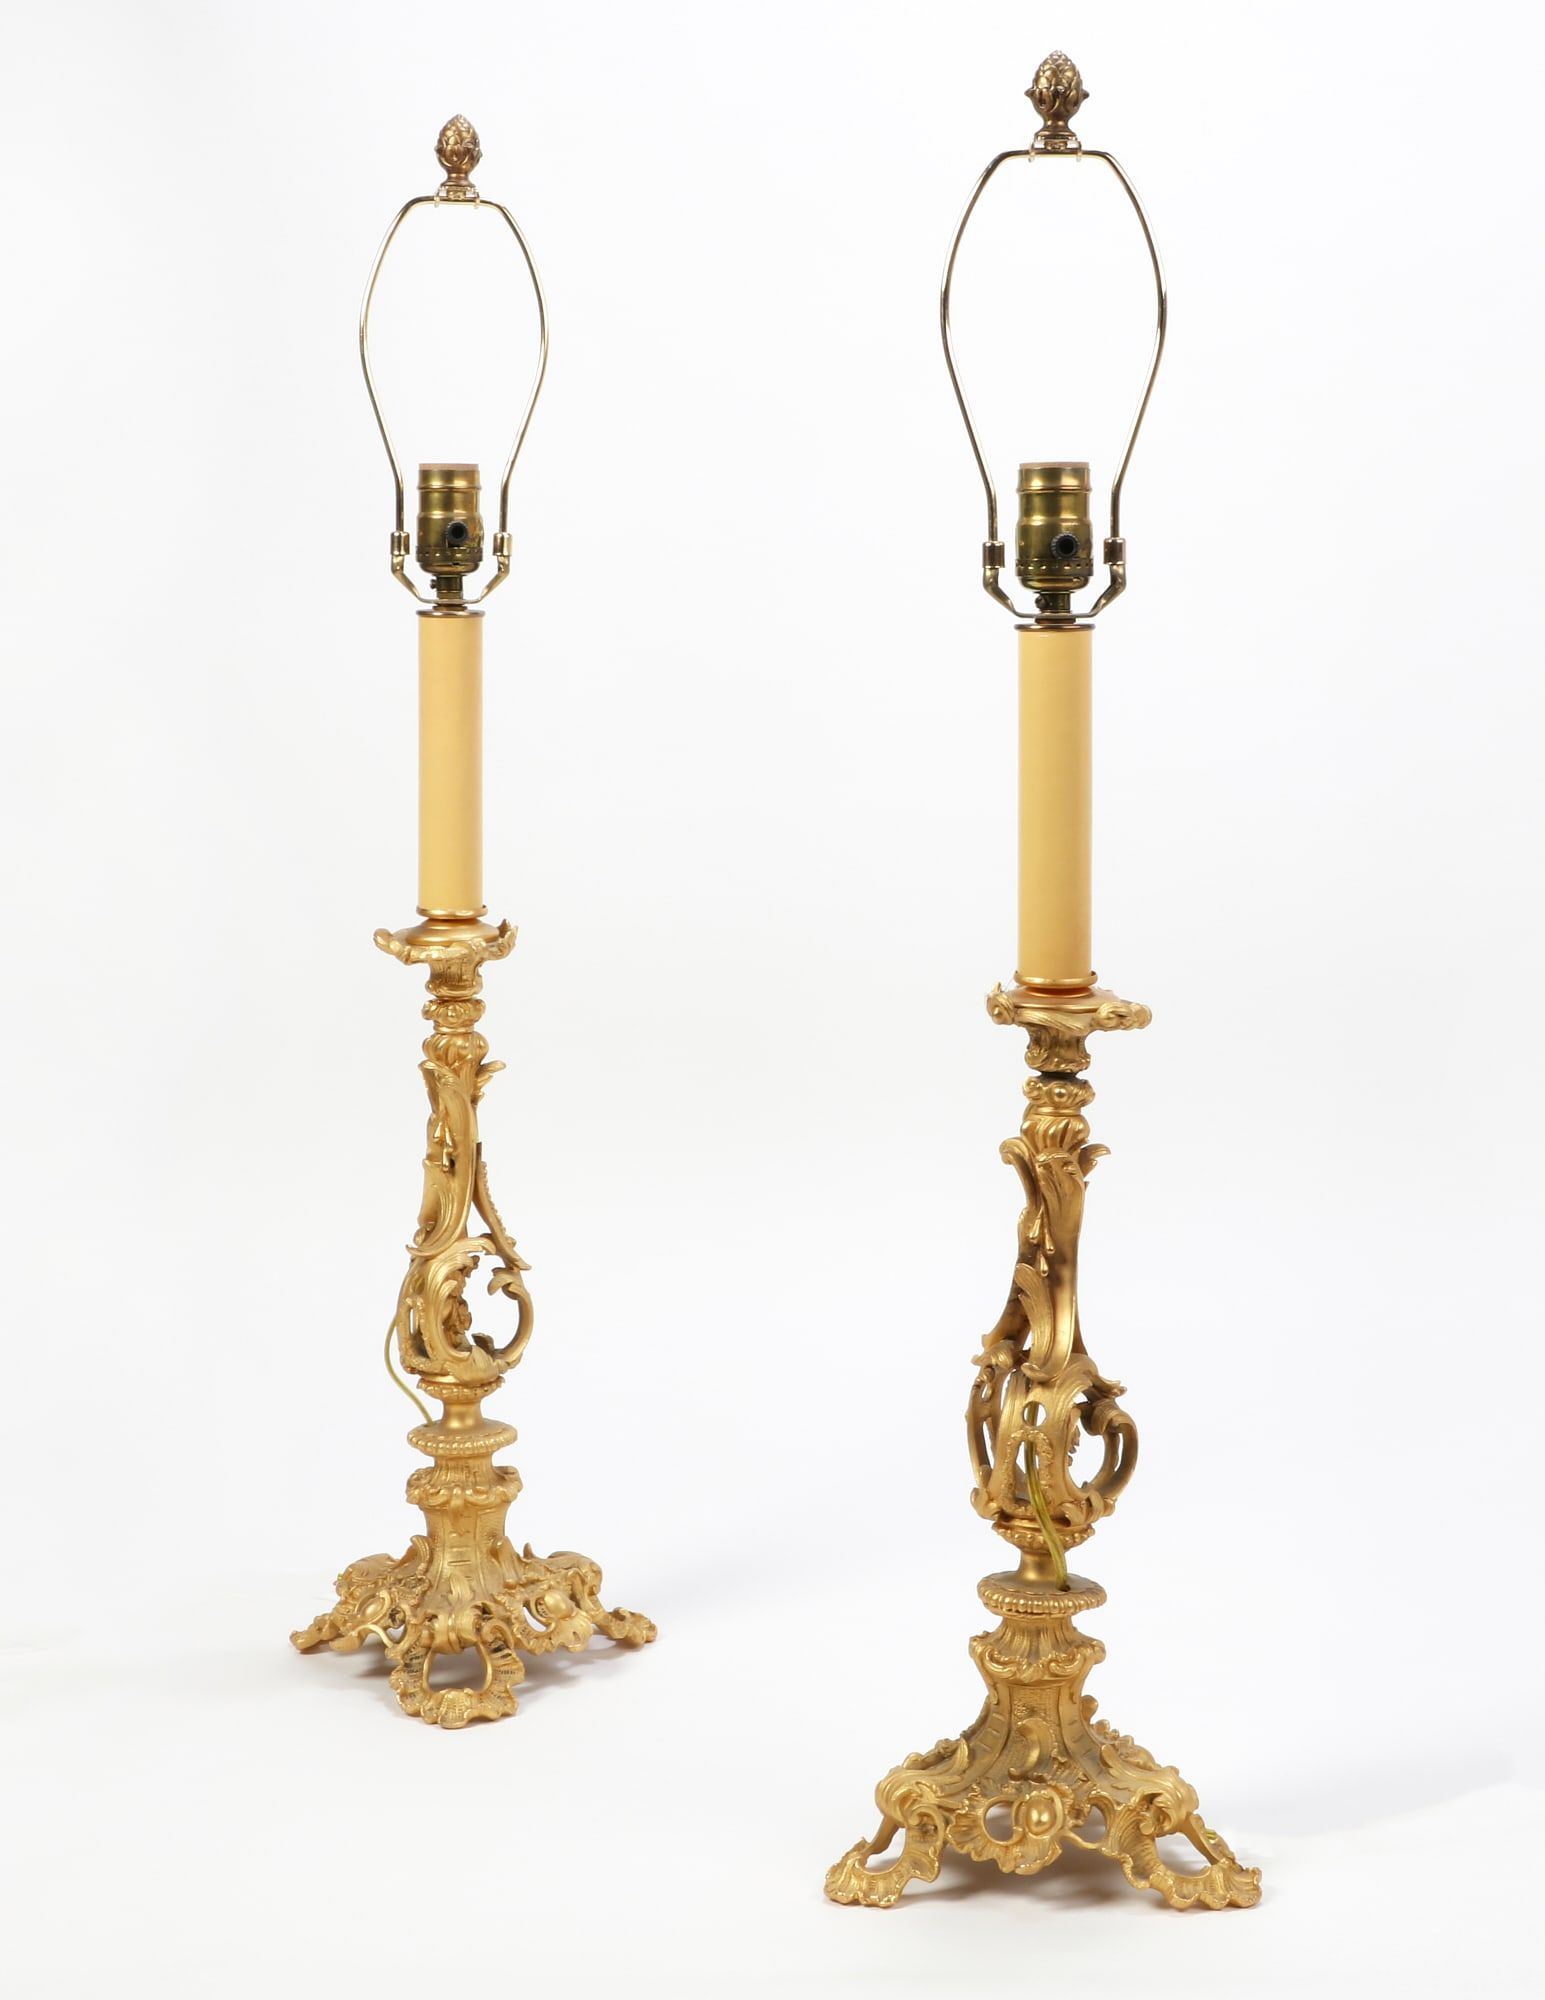 A PAIR OF ROCOCO STYLE GILT BRONZE